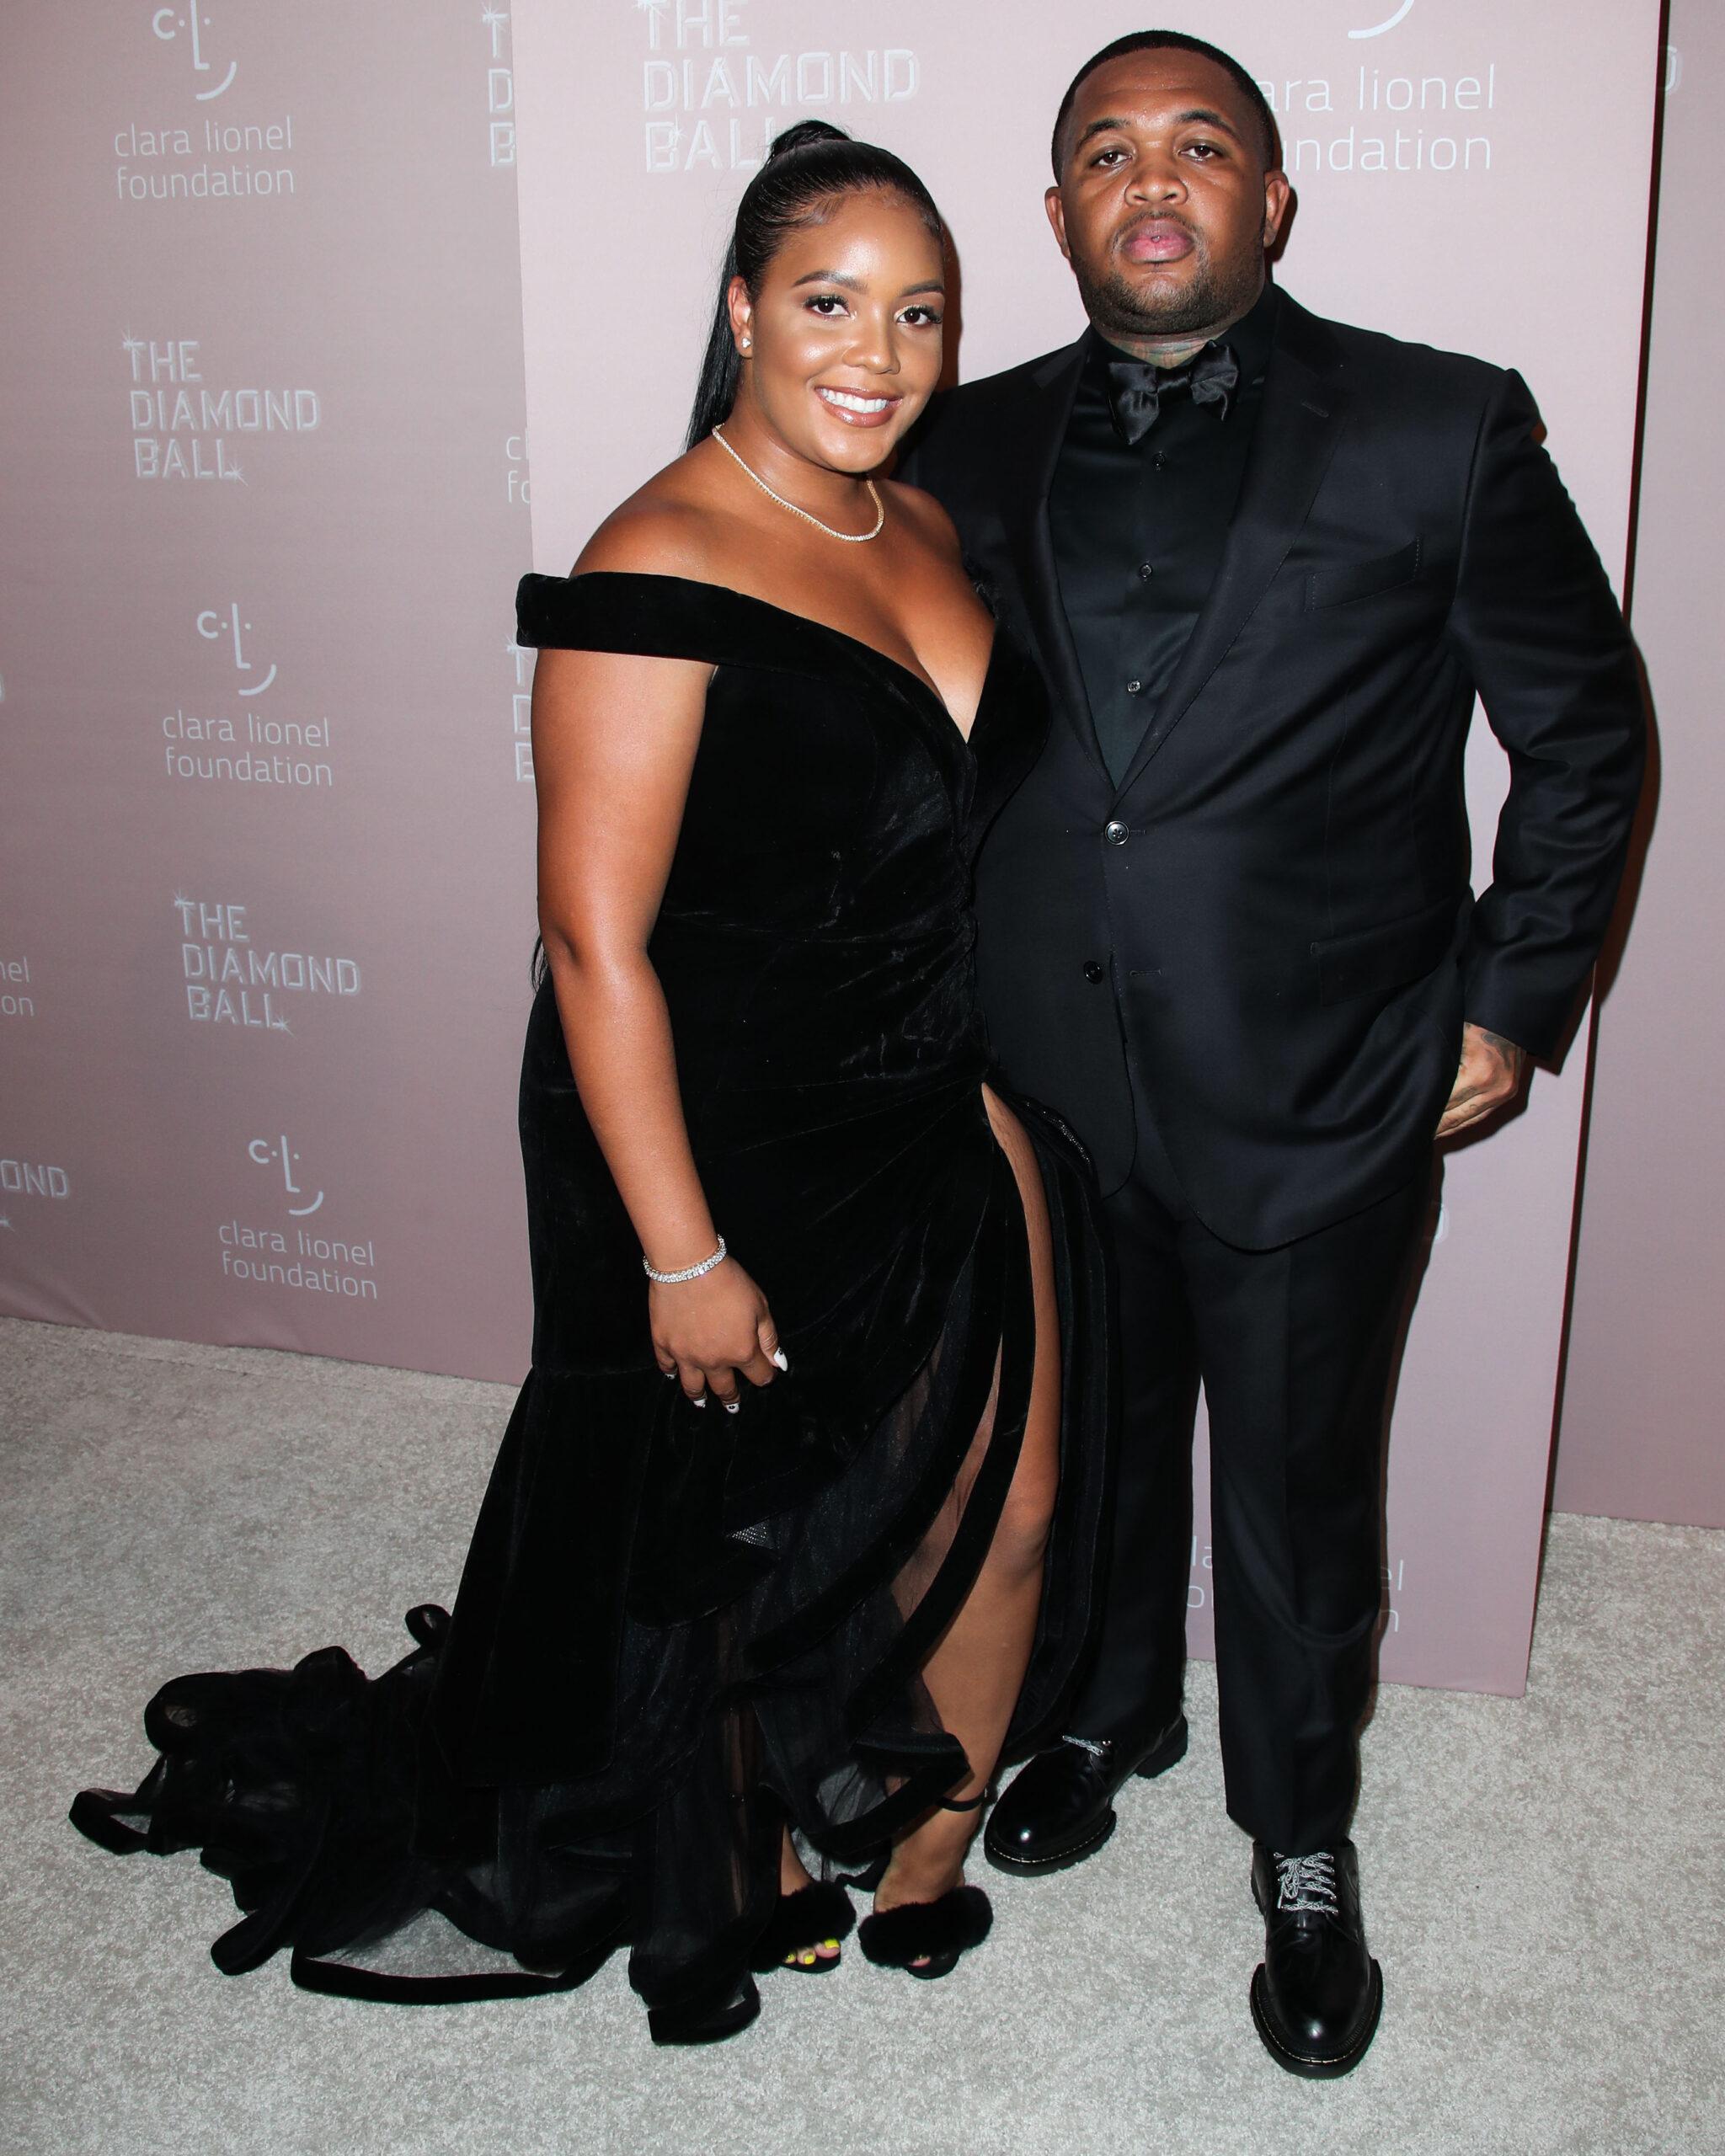 Chanel Thierry and DJ Mustard at Rihanna's 4th Annual Diamond Ball